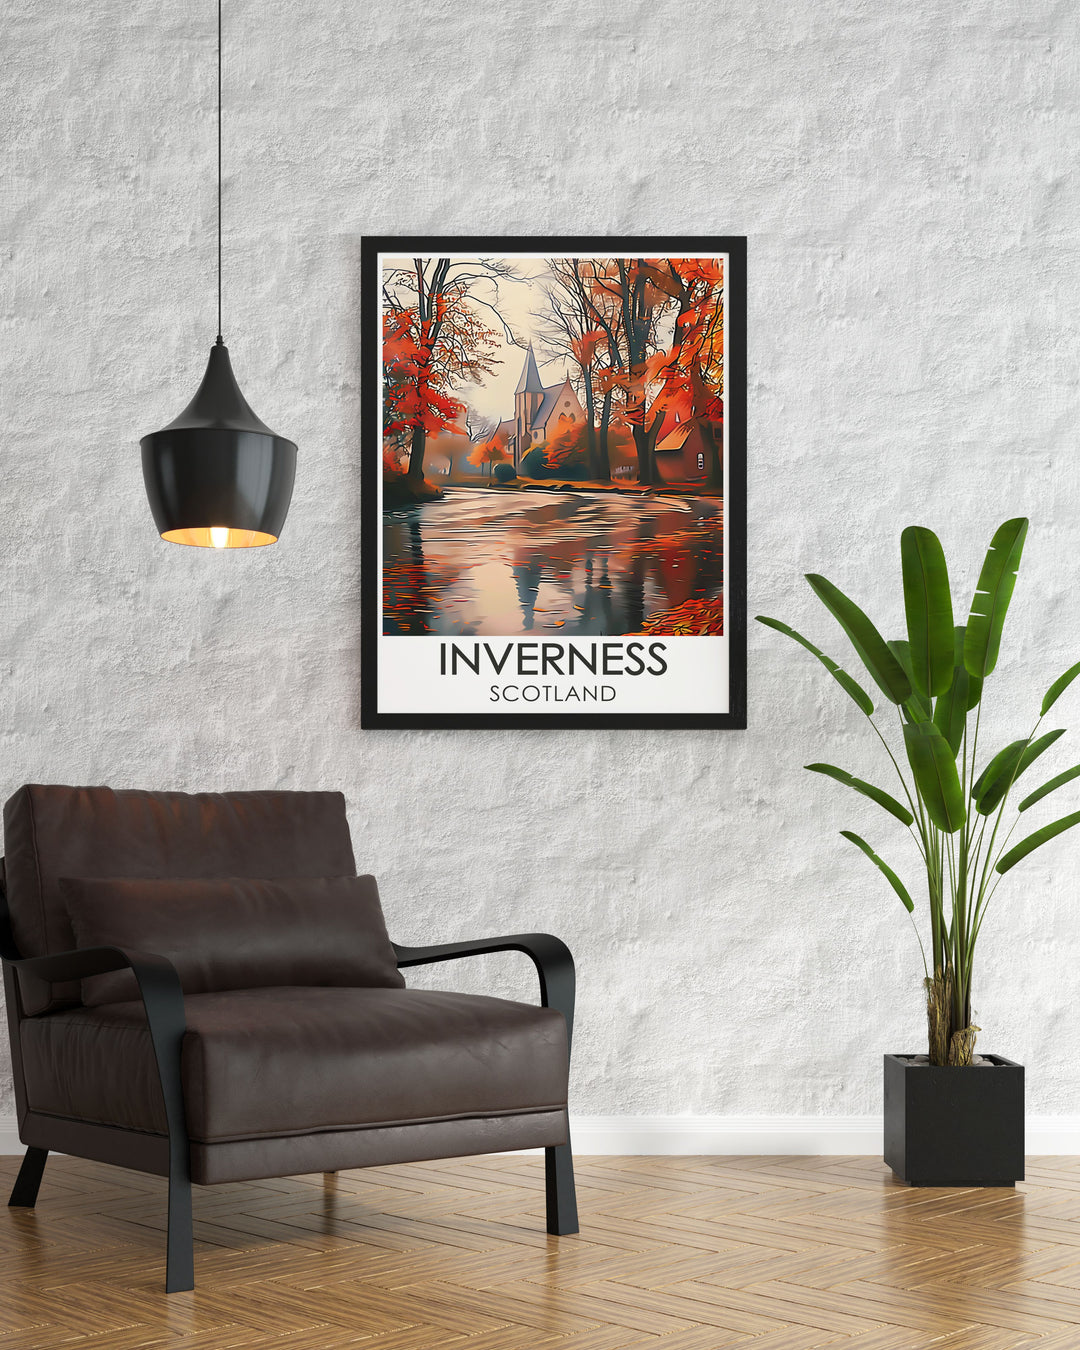 Vintage poster of Ness Islands, showcasing the tranquil setting and picturesque views, making it a perfect addition to any nature lovers home decor.